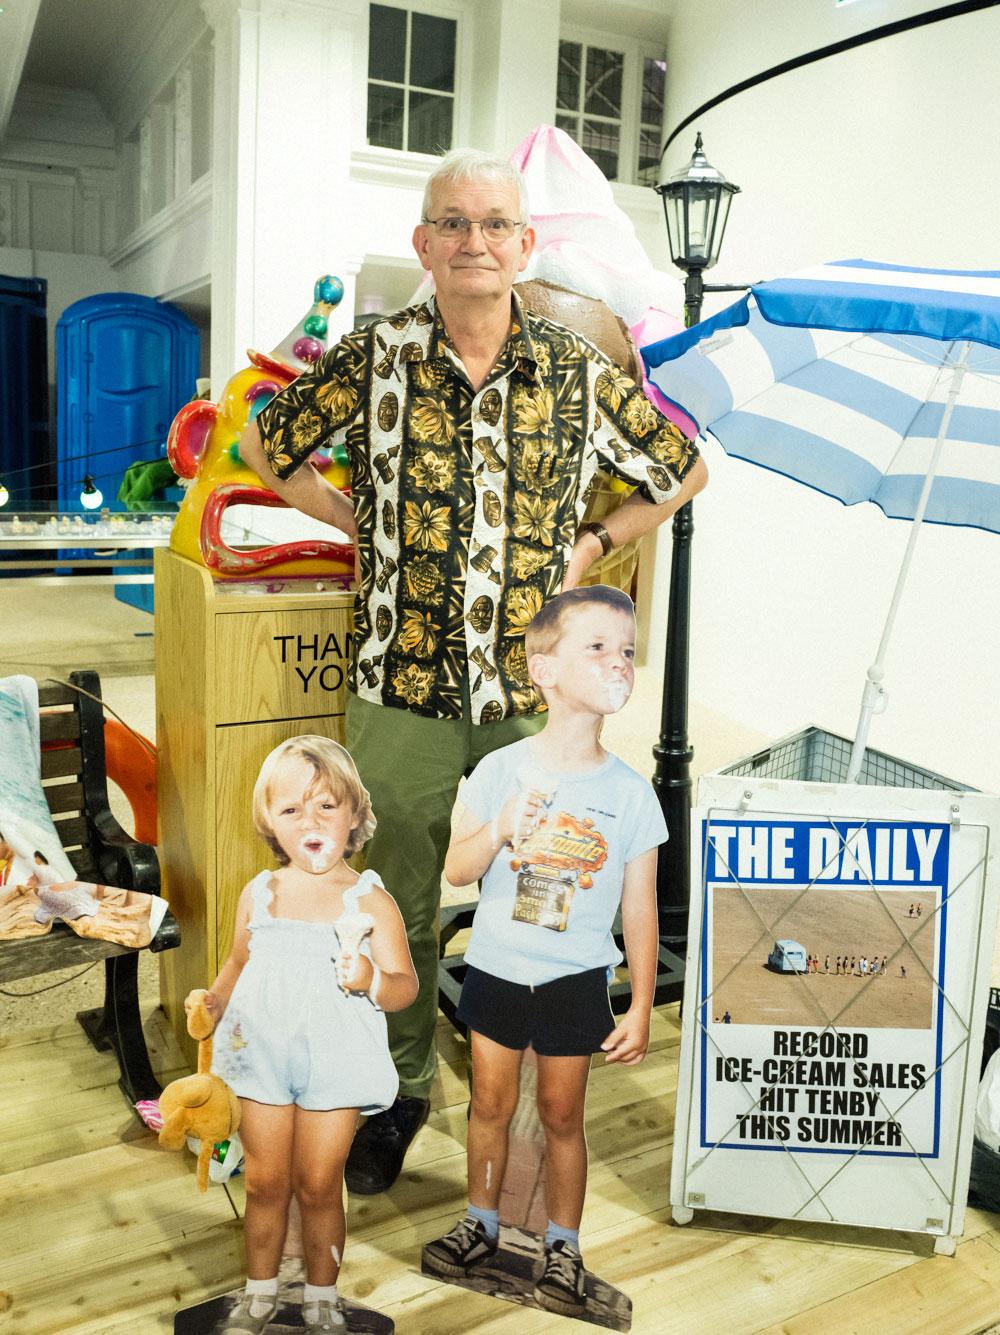 Martin Parr with cut-out figures from his 1985 photo story The Last Resort, at Dover Street Market in London